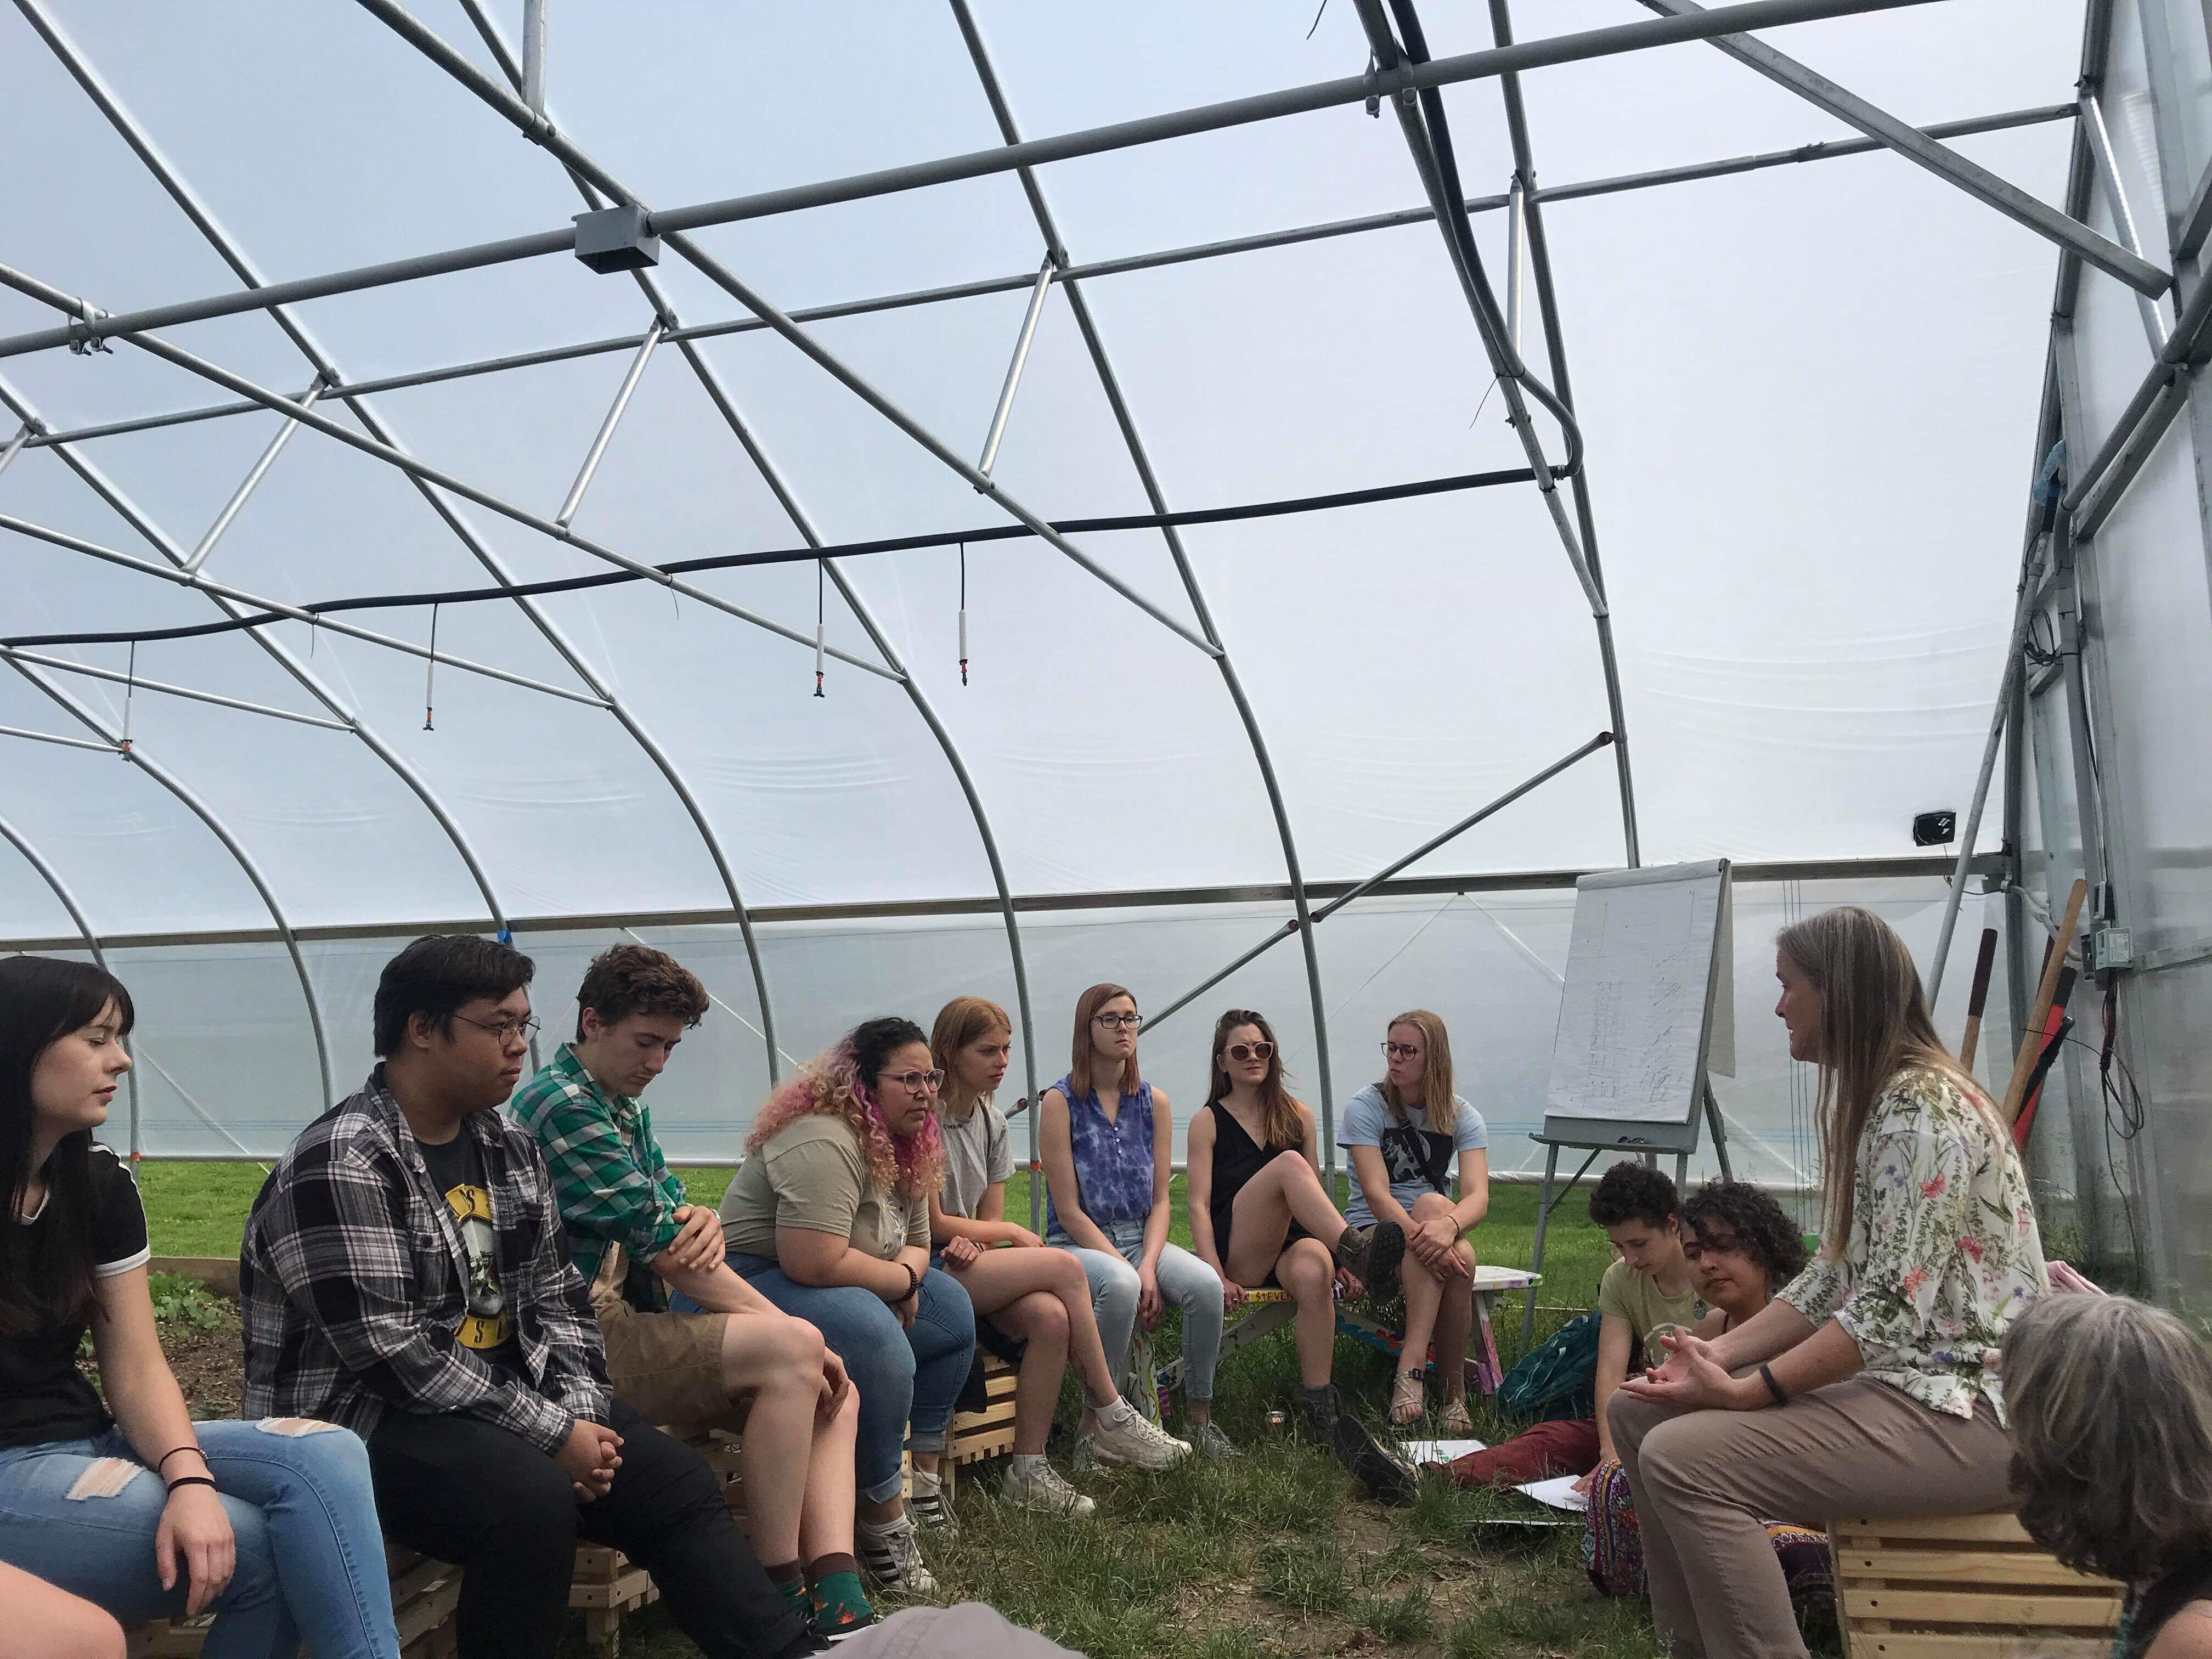 Dr. Binney Girdler leading a discussion in the hoophouse about ecology of gardens